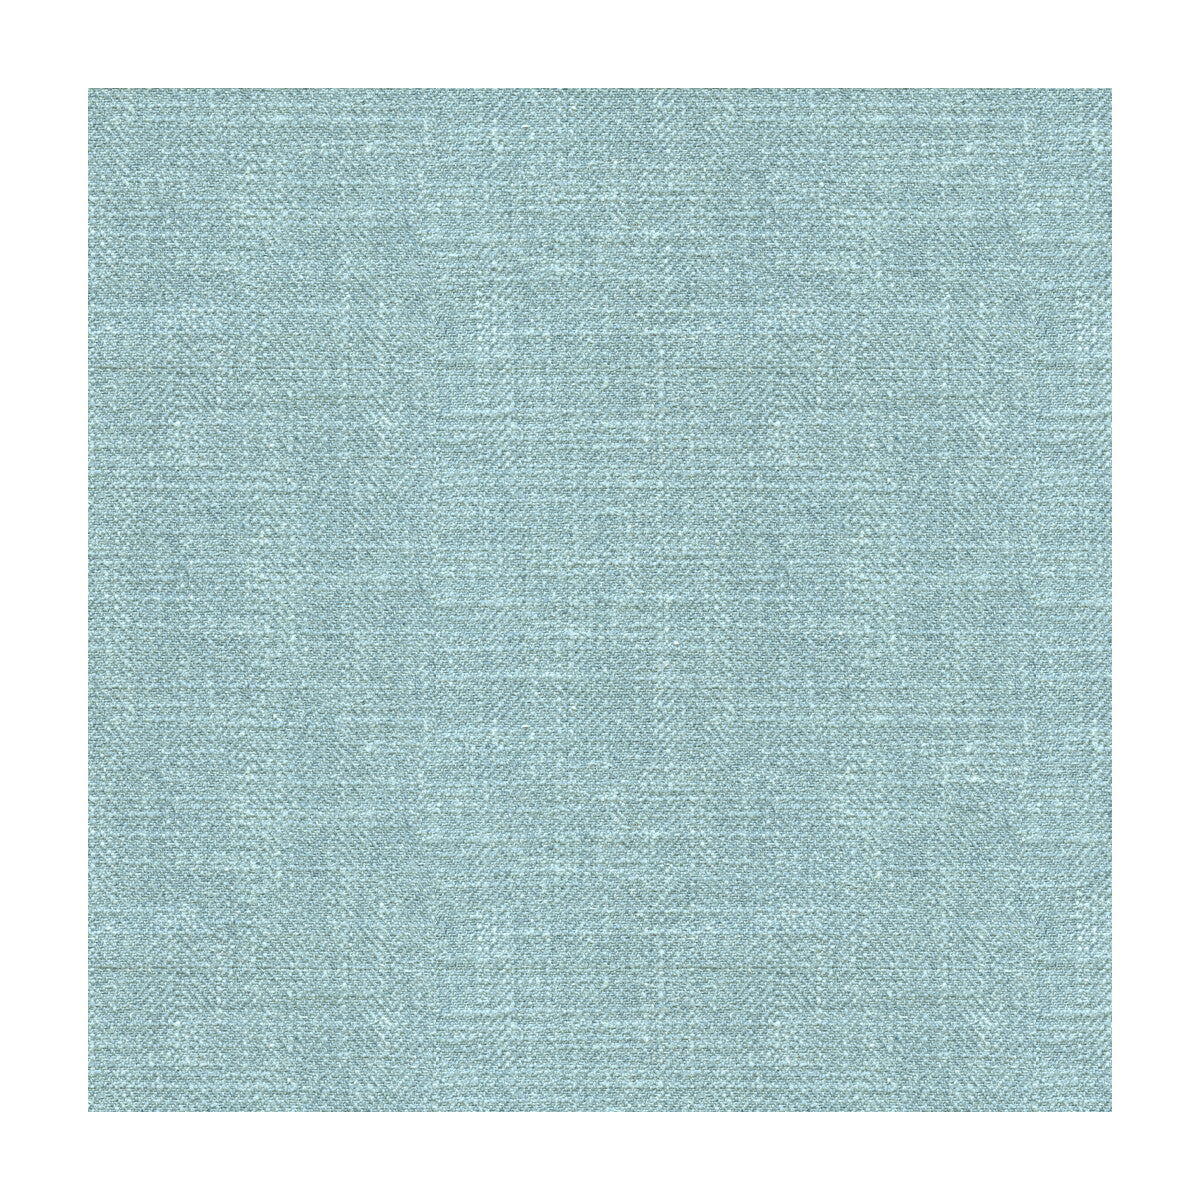 Kravet Basics fabric in 33842-5 color - pattern 33842.5.0 - by Kravet Basics in the Perfect Plains collection